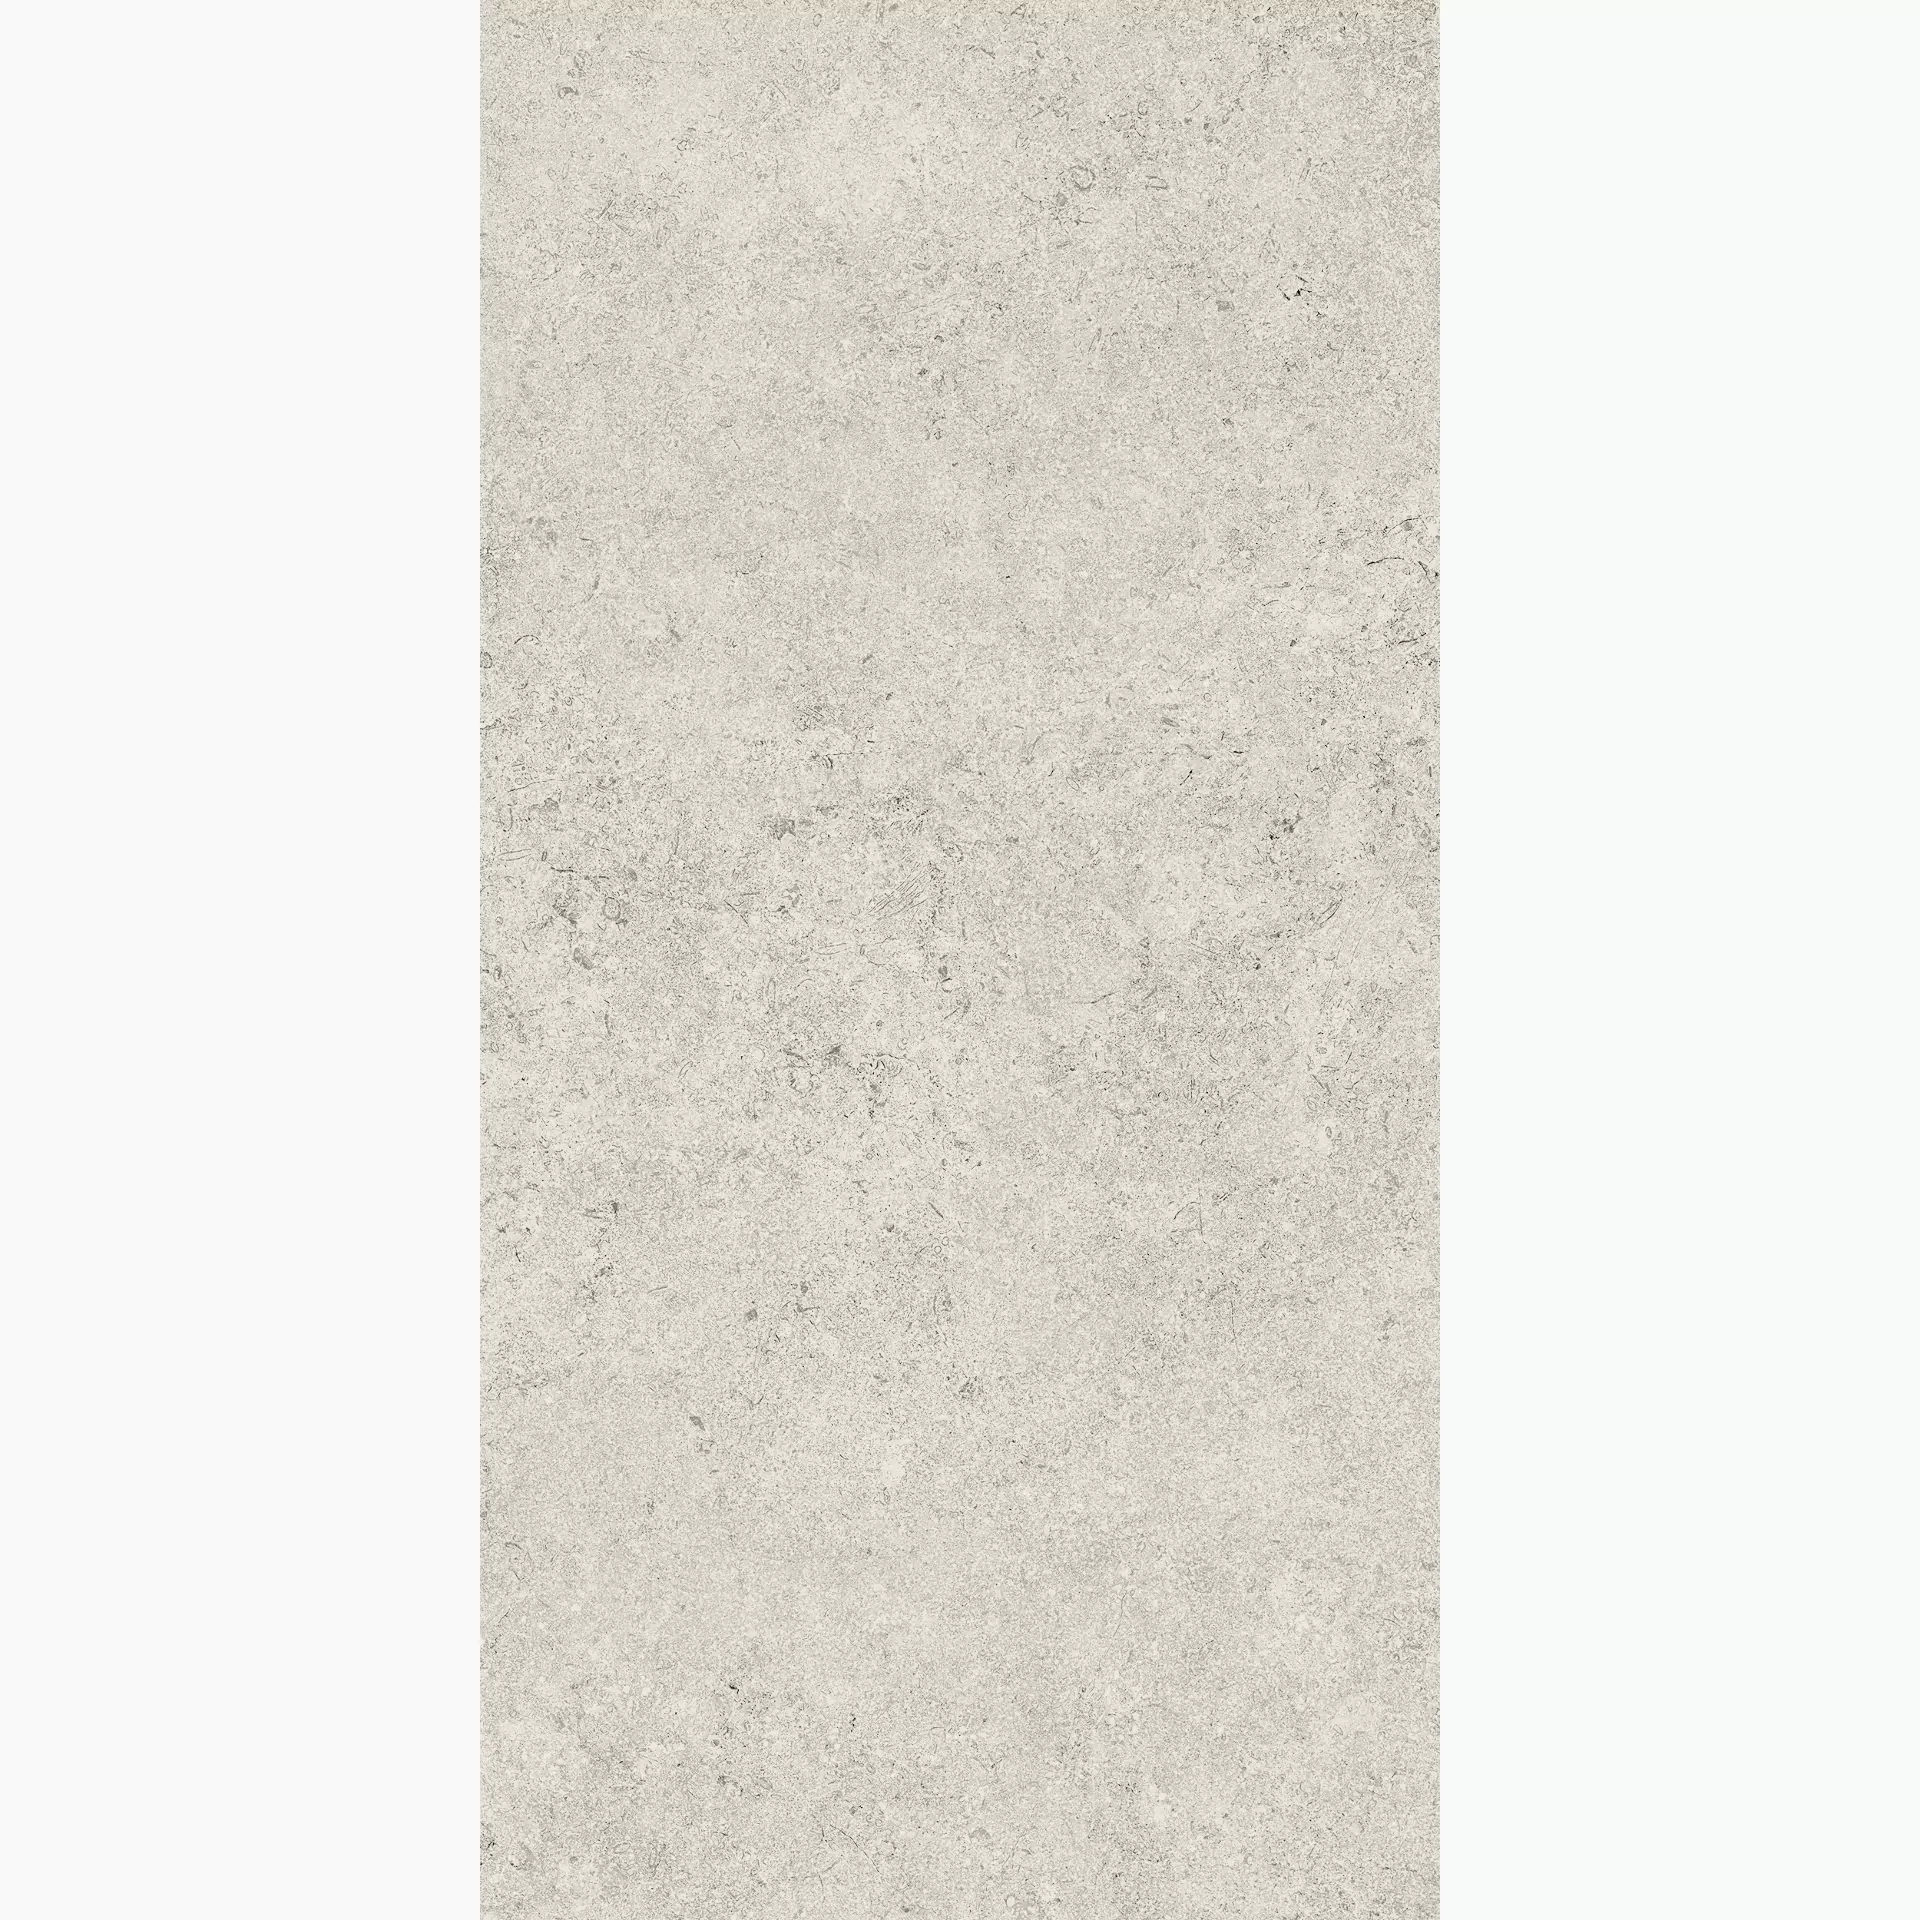 Cottodeste Pura Pearl Rolled Protect EG-PR25 30x60cm rectified 14mm